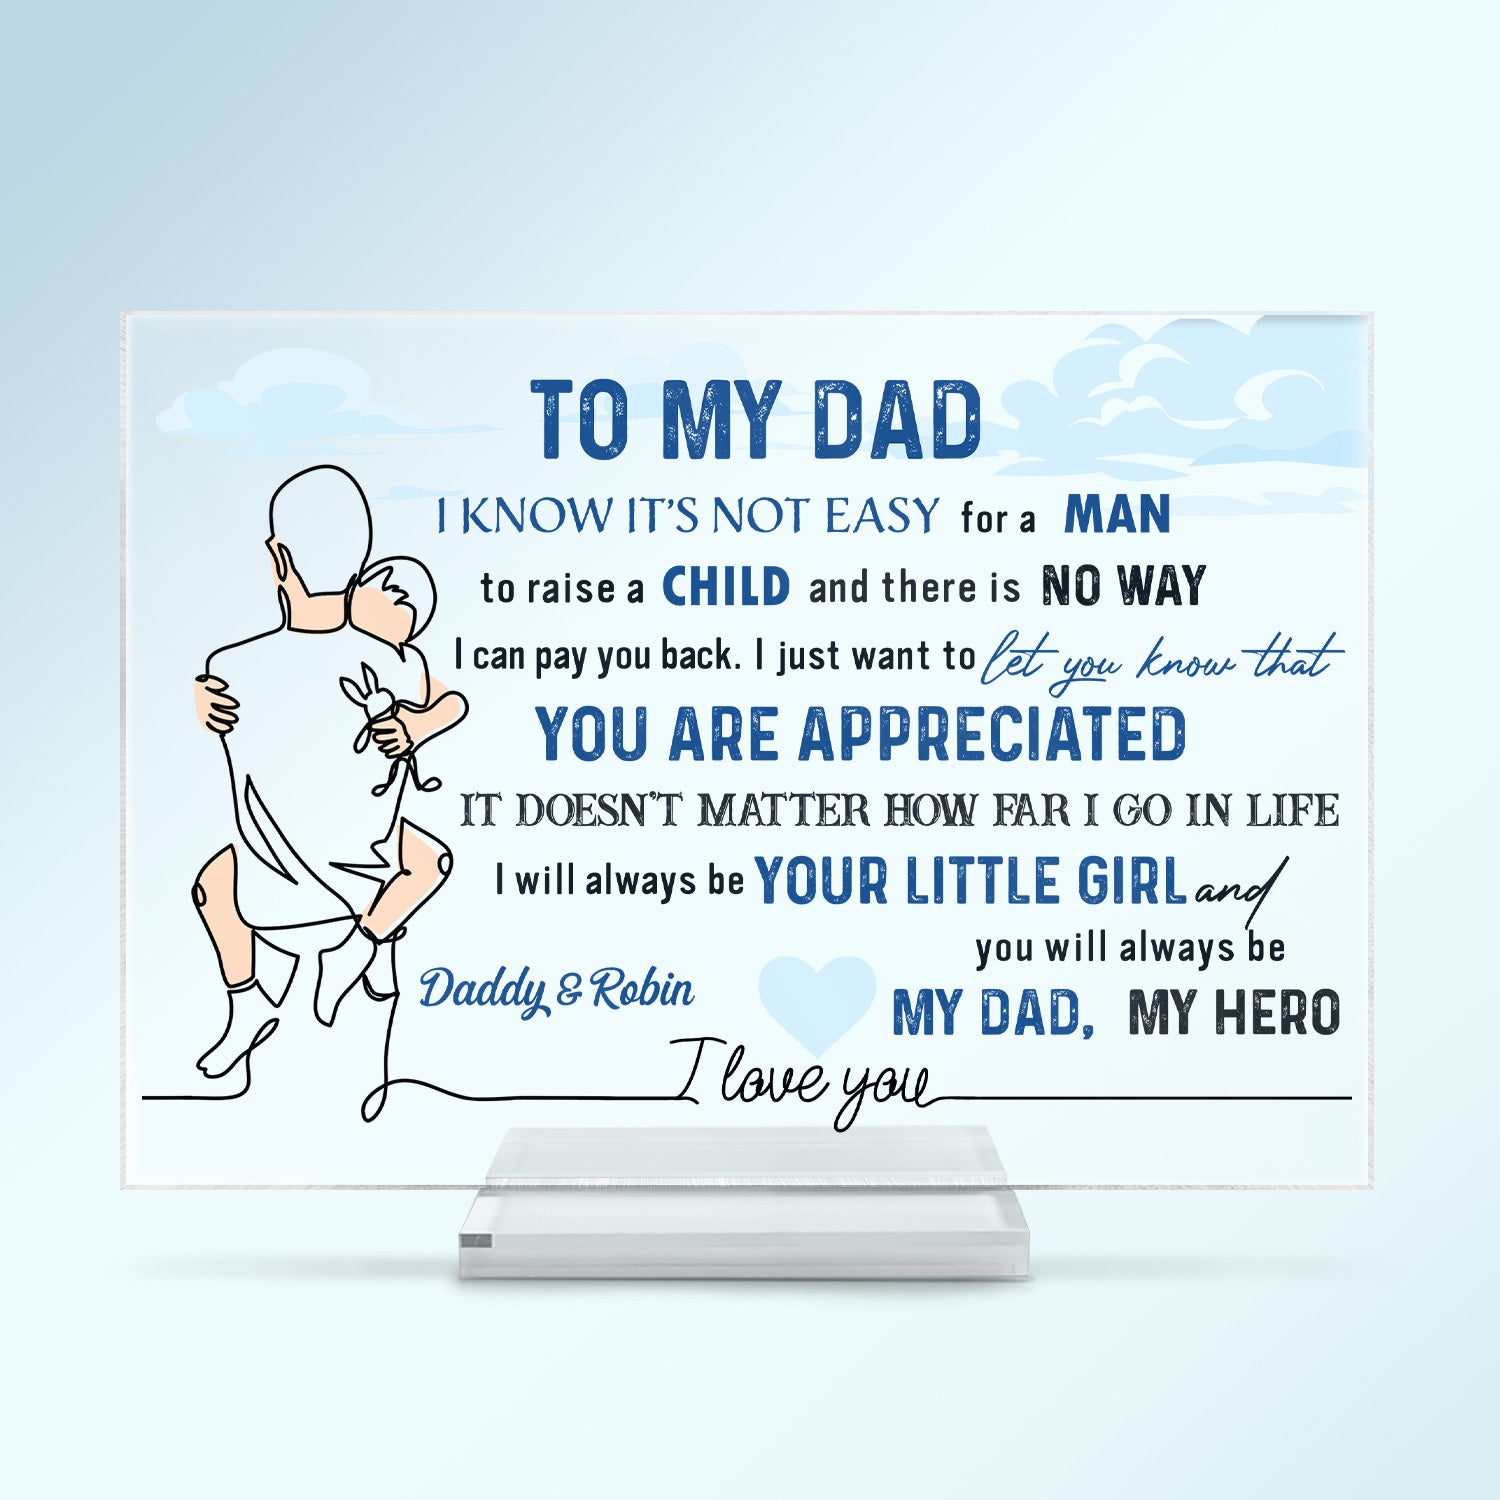 To My Dad I Know It's Not Easy - Birthday, Loving, Decor Gift For Dad, Father, Grandpa, Grandfather - Personalized Custom Horizontal Rectangle Acrylic Plaque